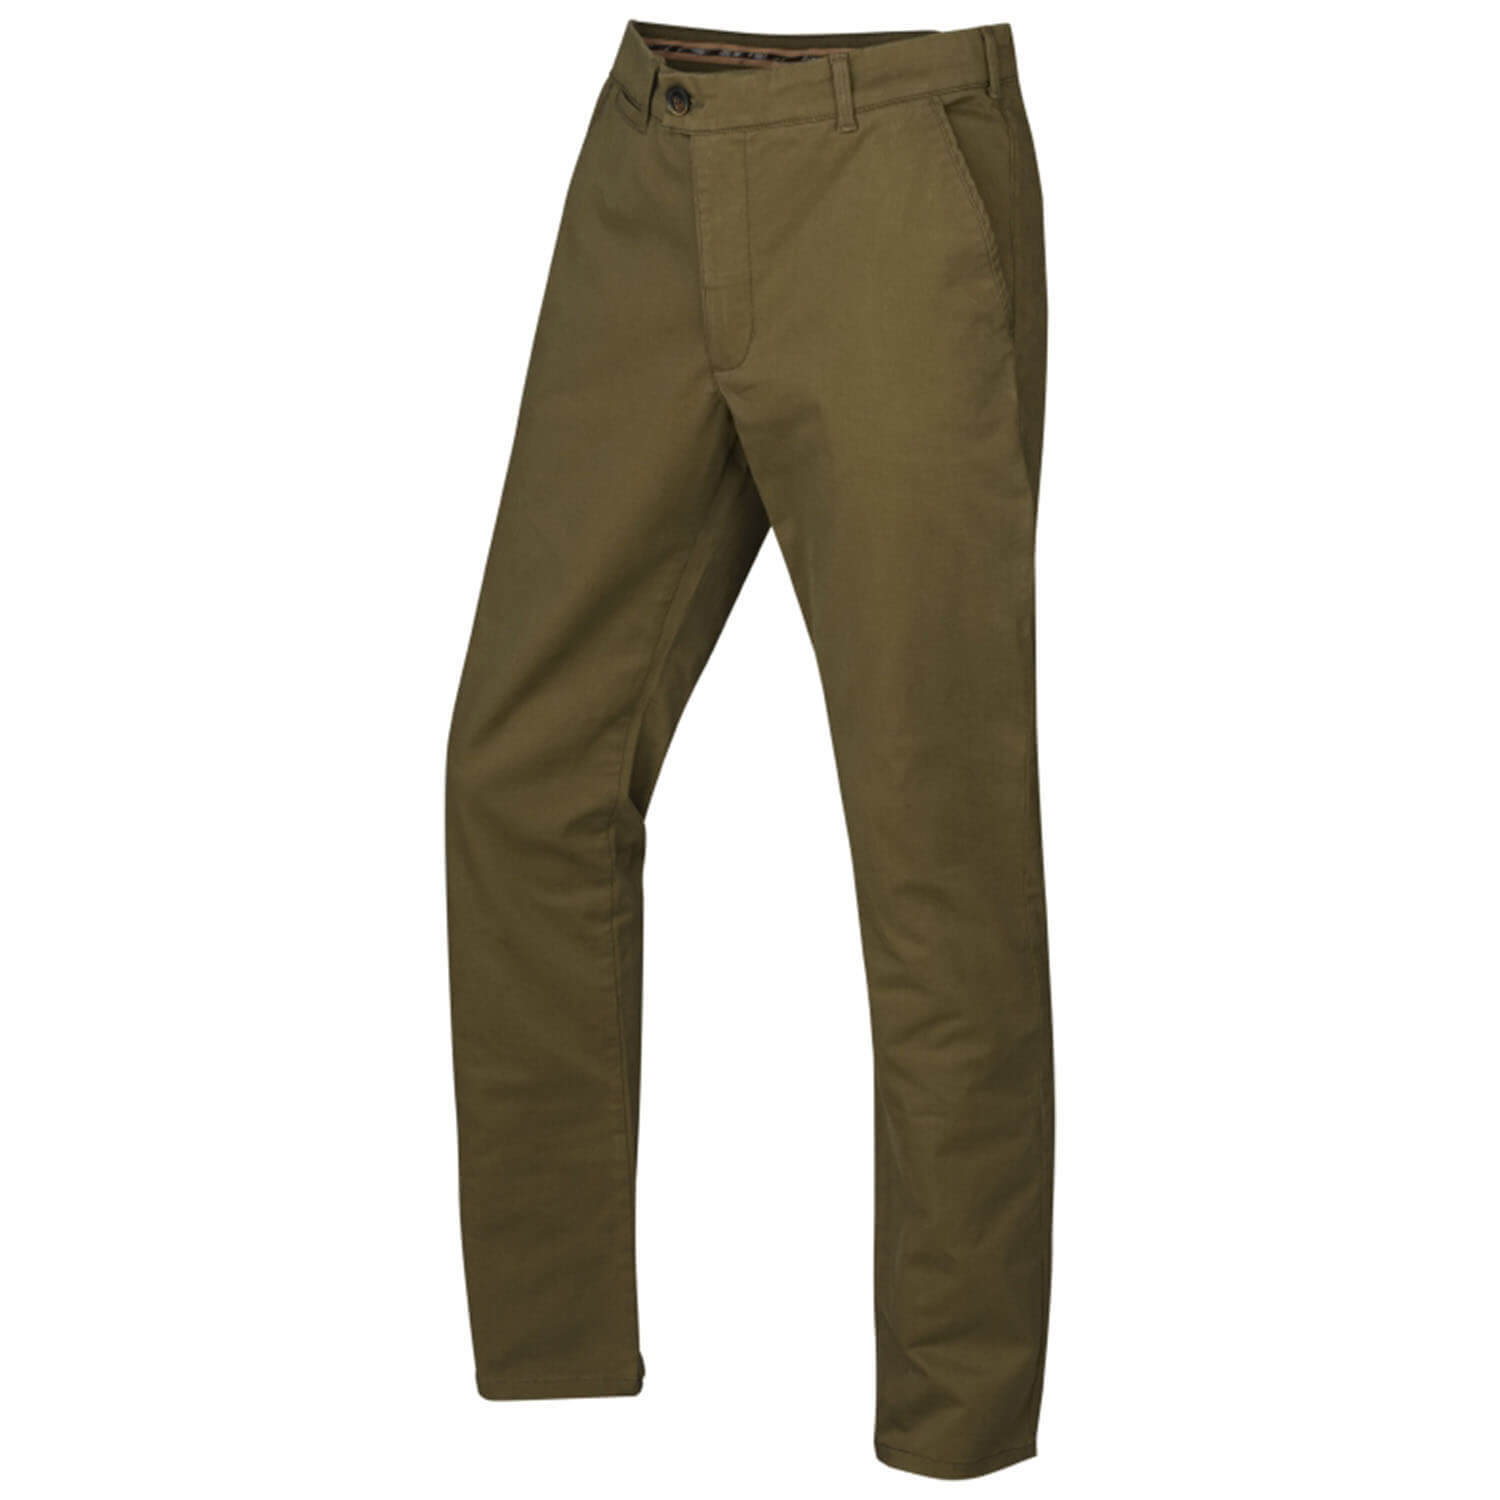 Härkila hunting trousers norberg (oliv) - Hunting Trousers